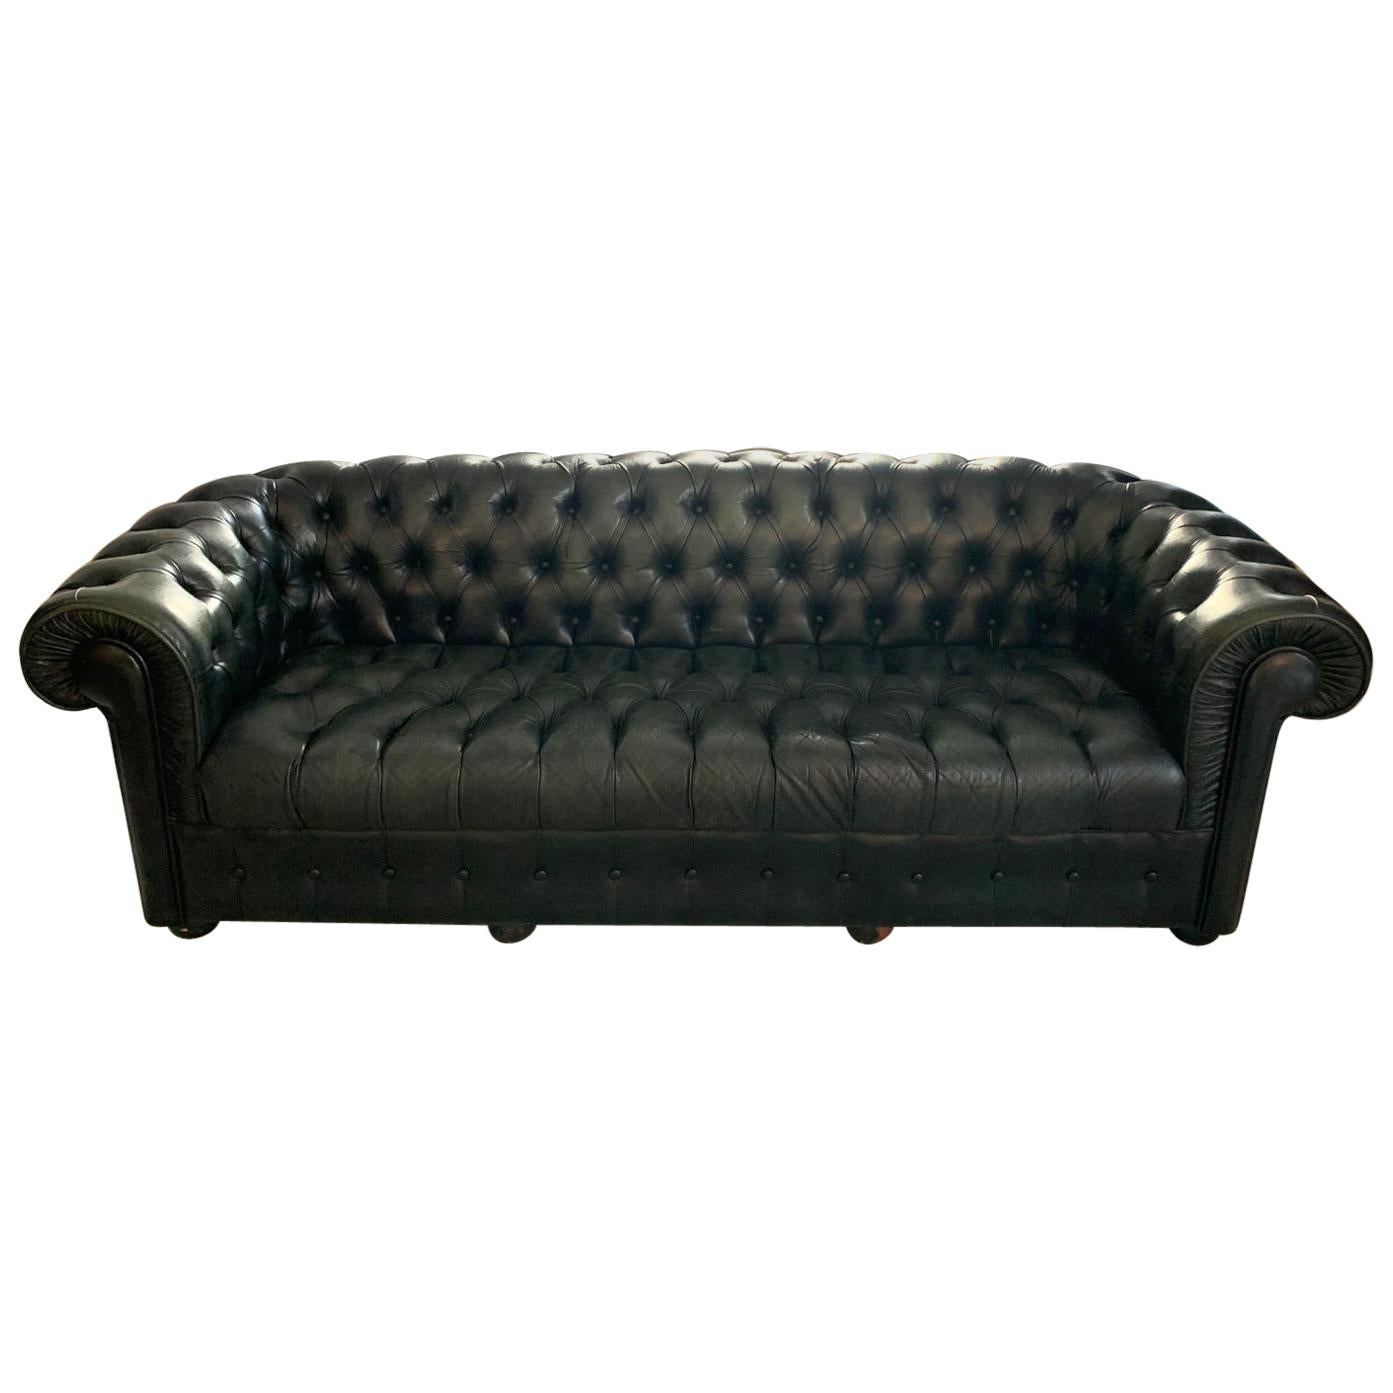 Vintage Midcentury Chesterfield Leather Sofa Dark Green For Sale